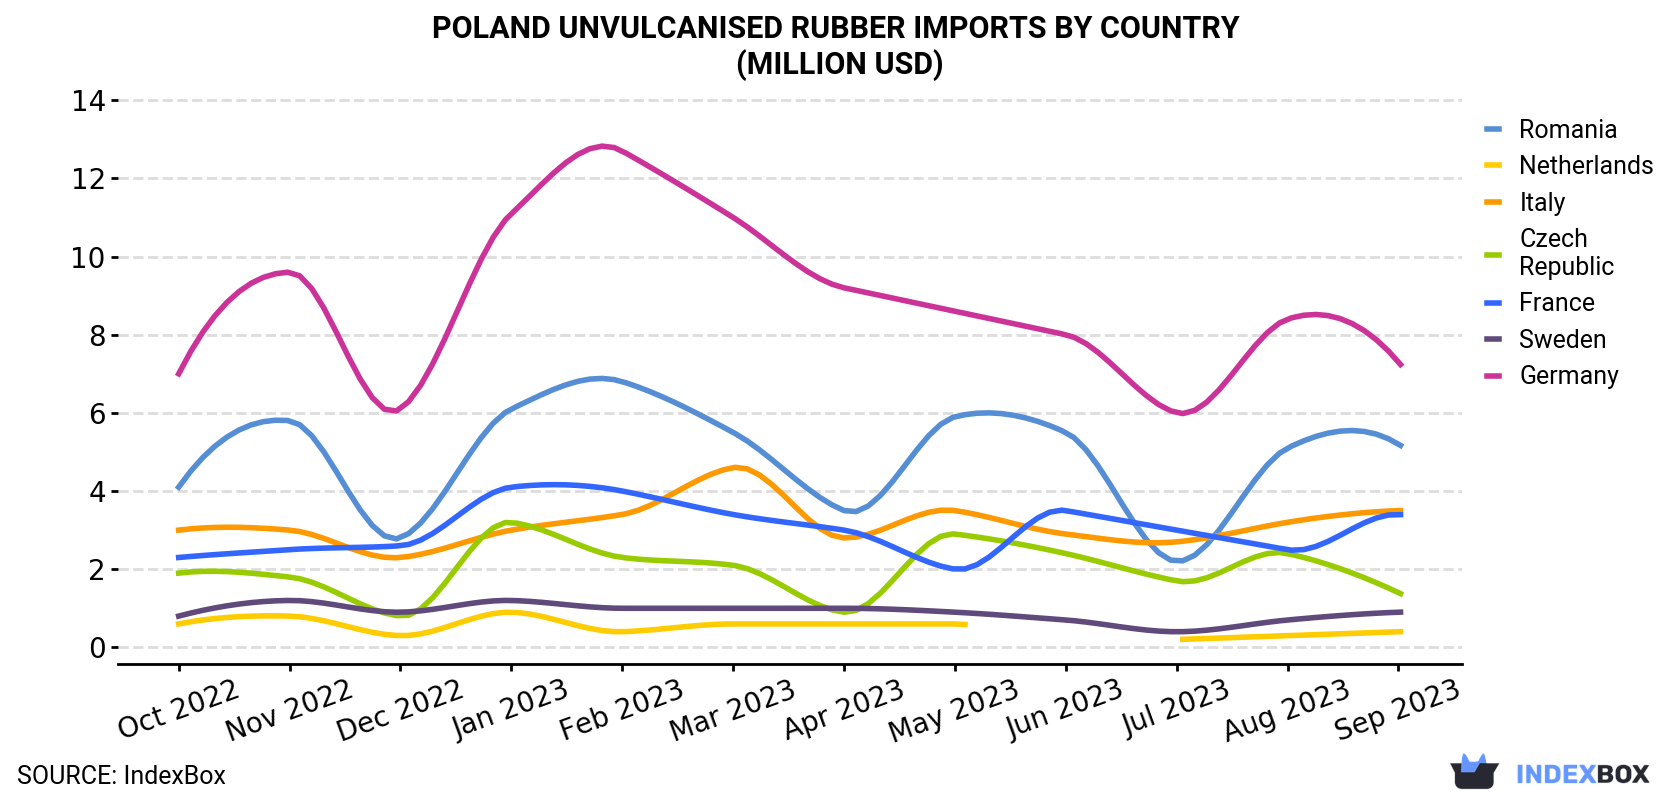 Poland Unvulcanised Rubber Imports By Country (Million USD)